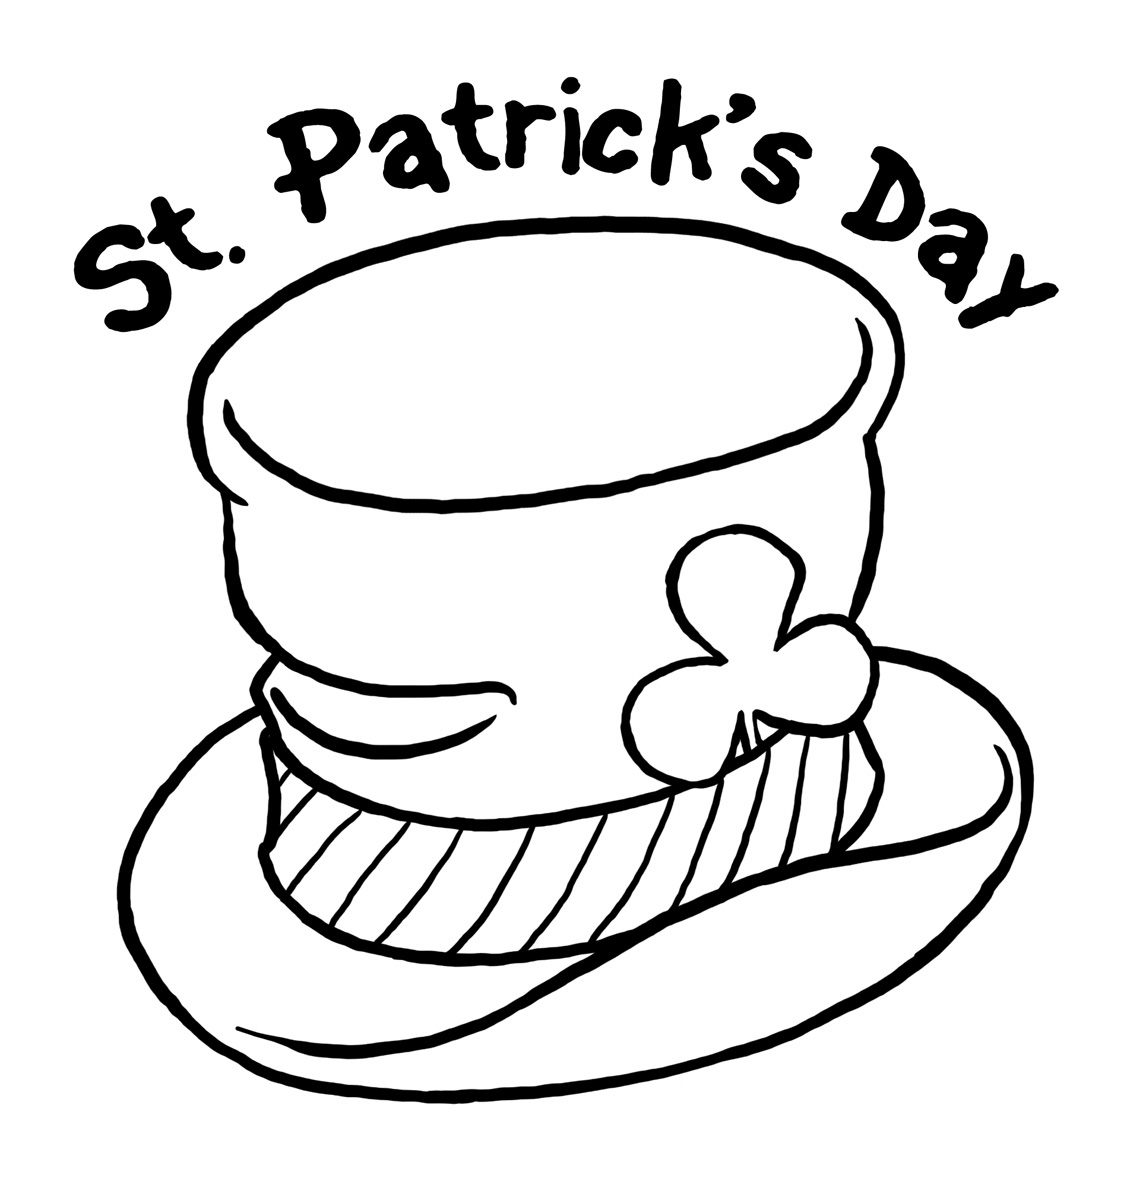 Free St Patricks Day Drawings Download Free St Patricks Day Drawings